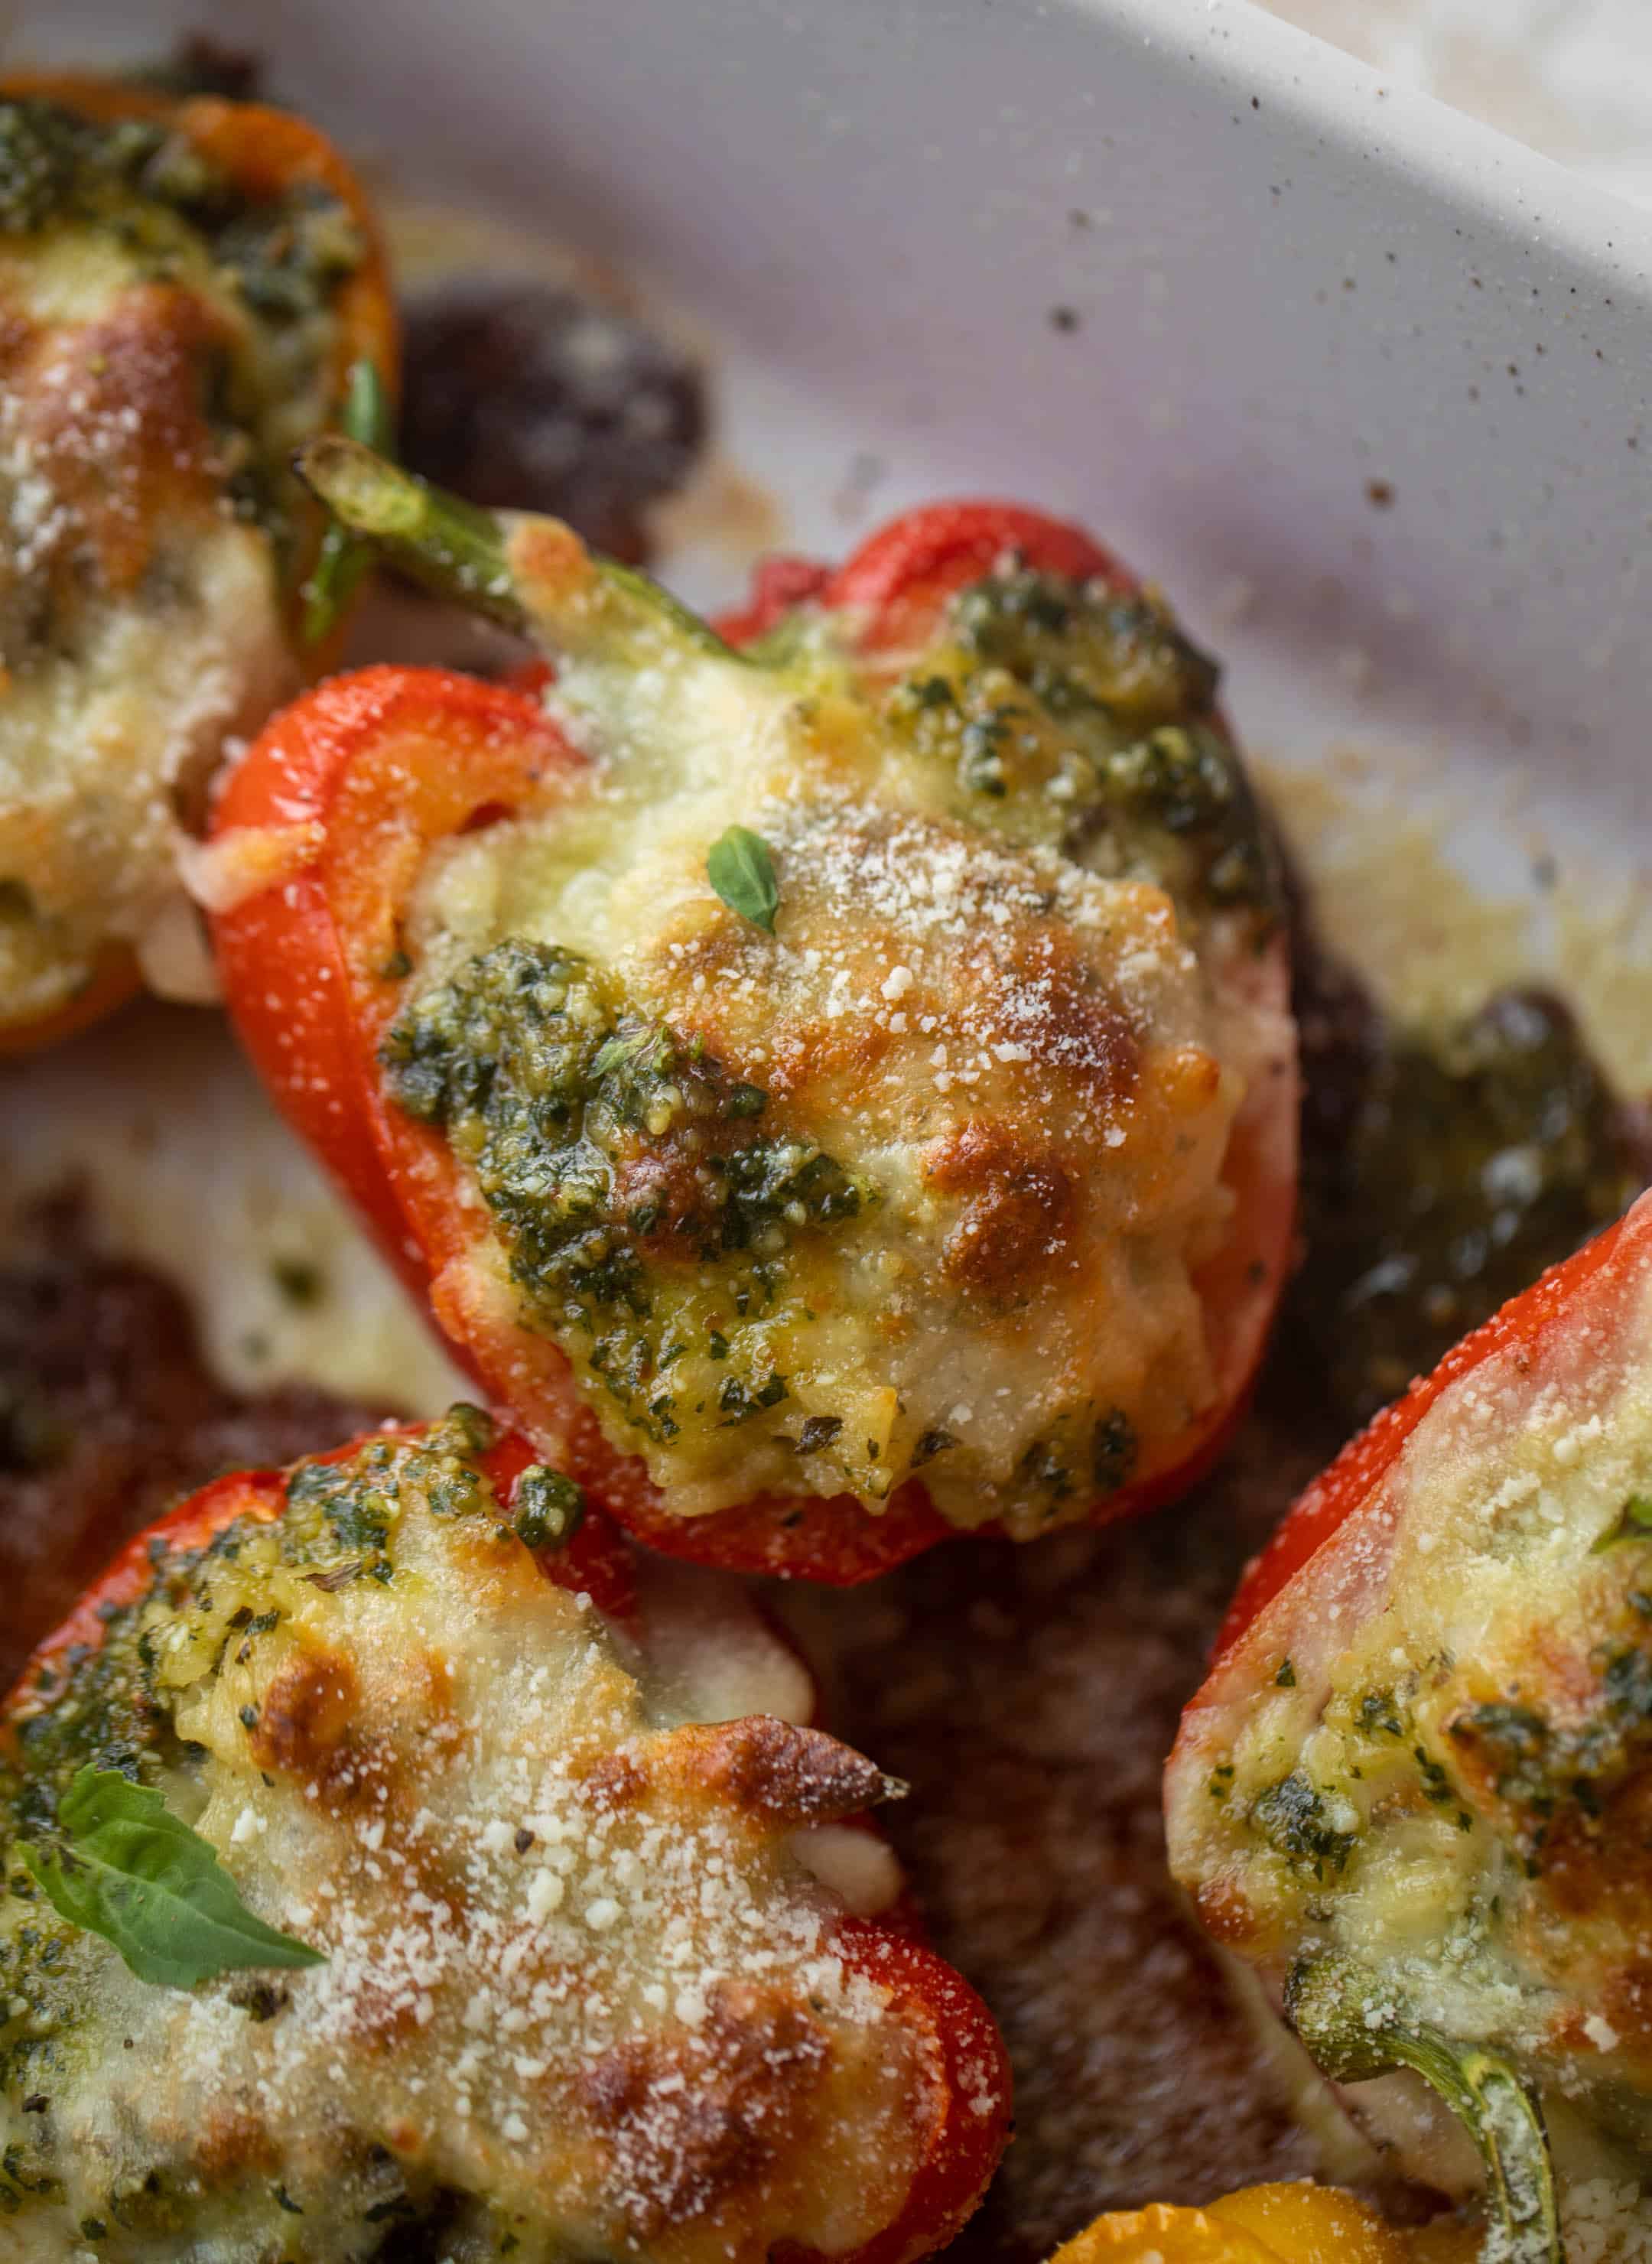 pesto risotto stuffed peppers